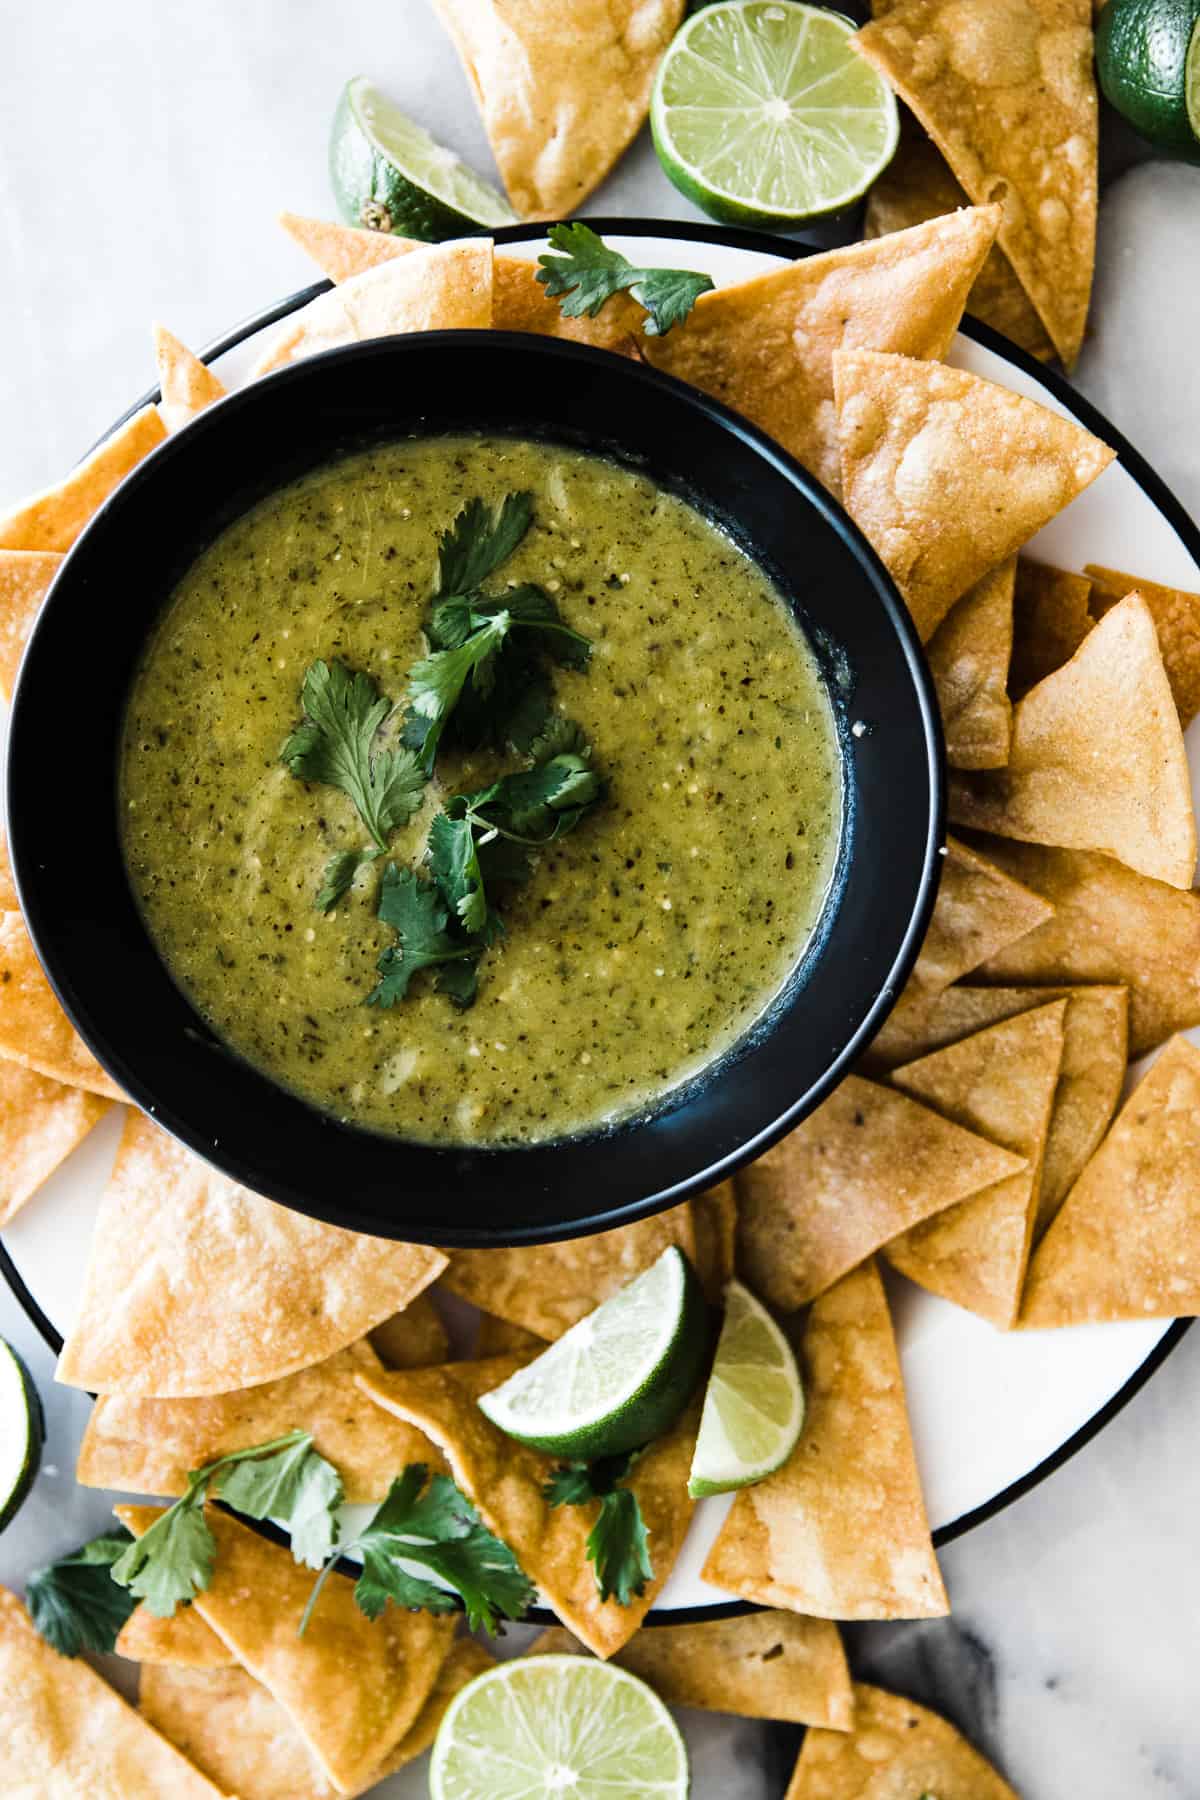 Tomatillo salsa verde in black bowl on a plate surrounded by tortilla chips.